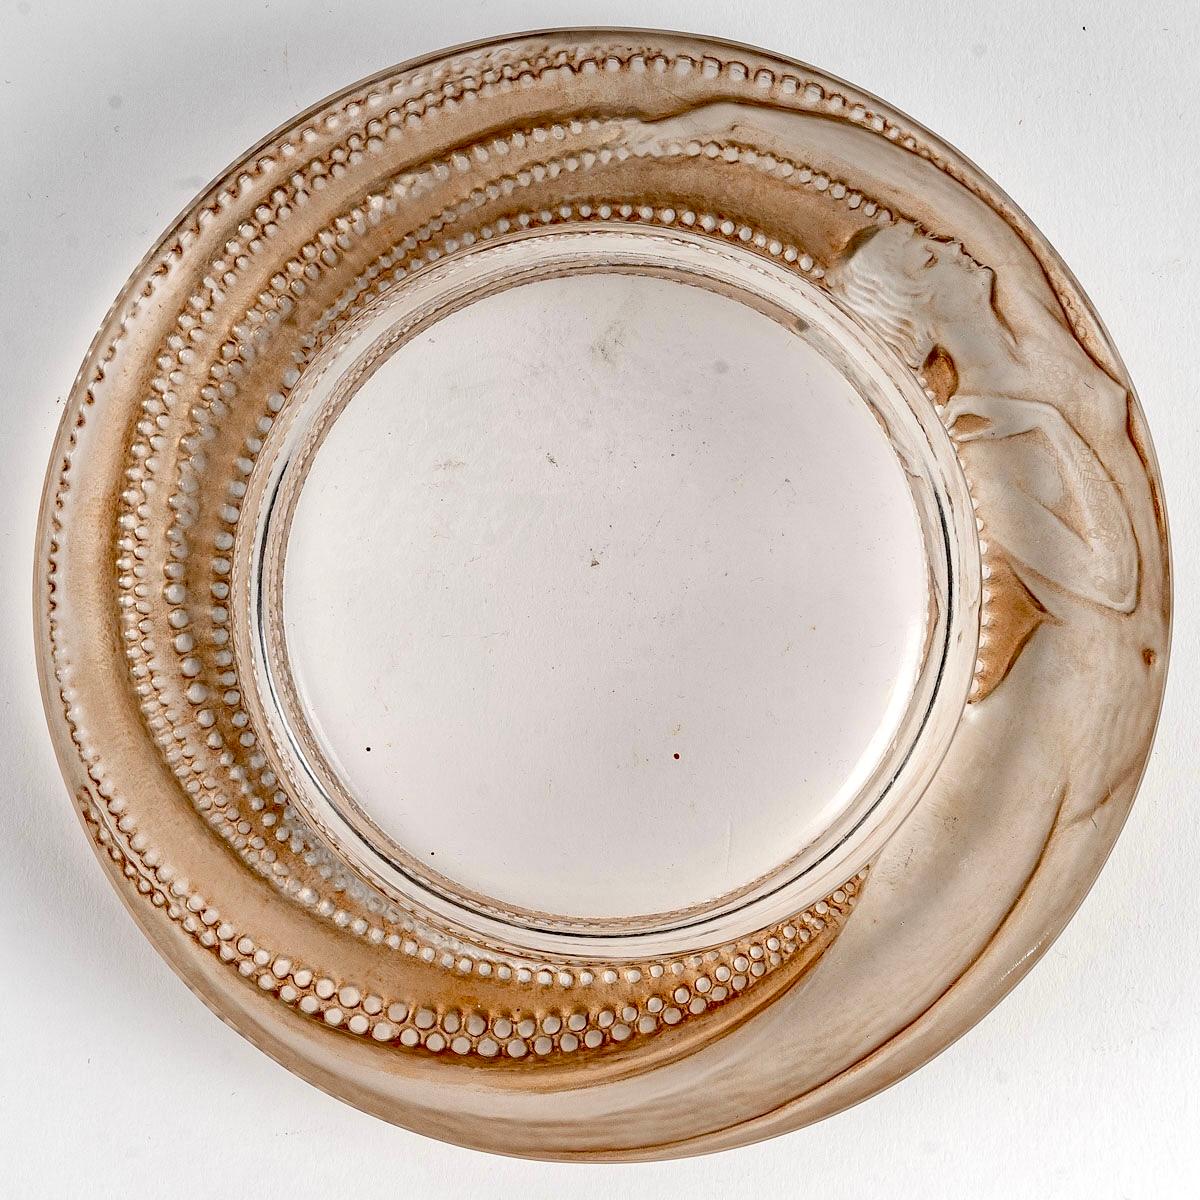 Early 20th Century 1927 René Lalique, Ashtray Antheor Frosted Glass with Sepia Patina, Mermaid